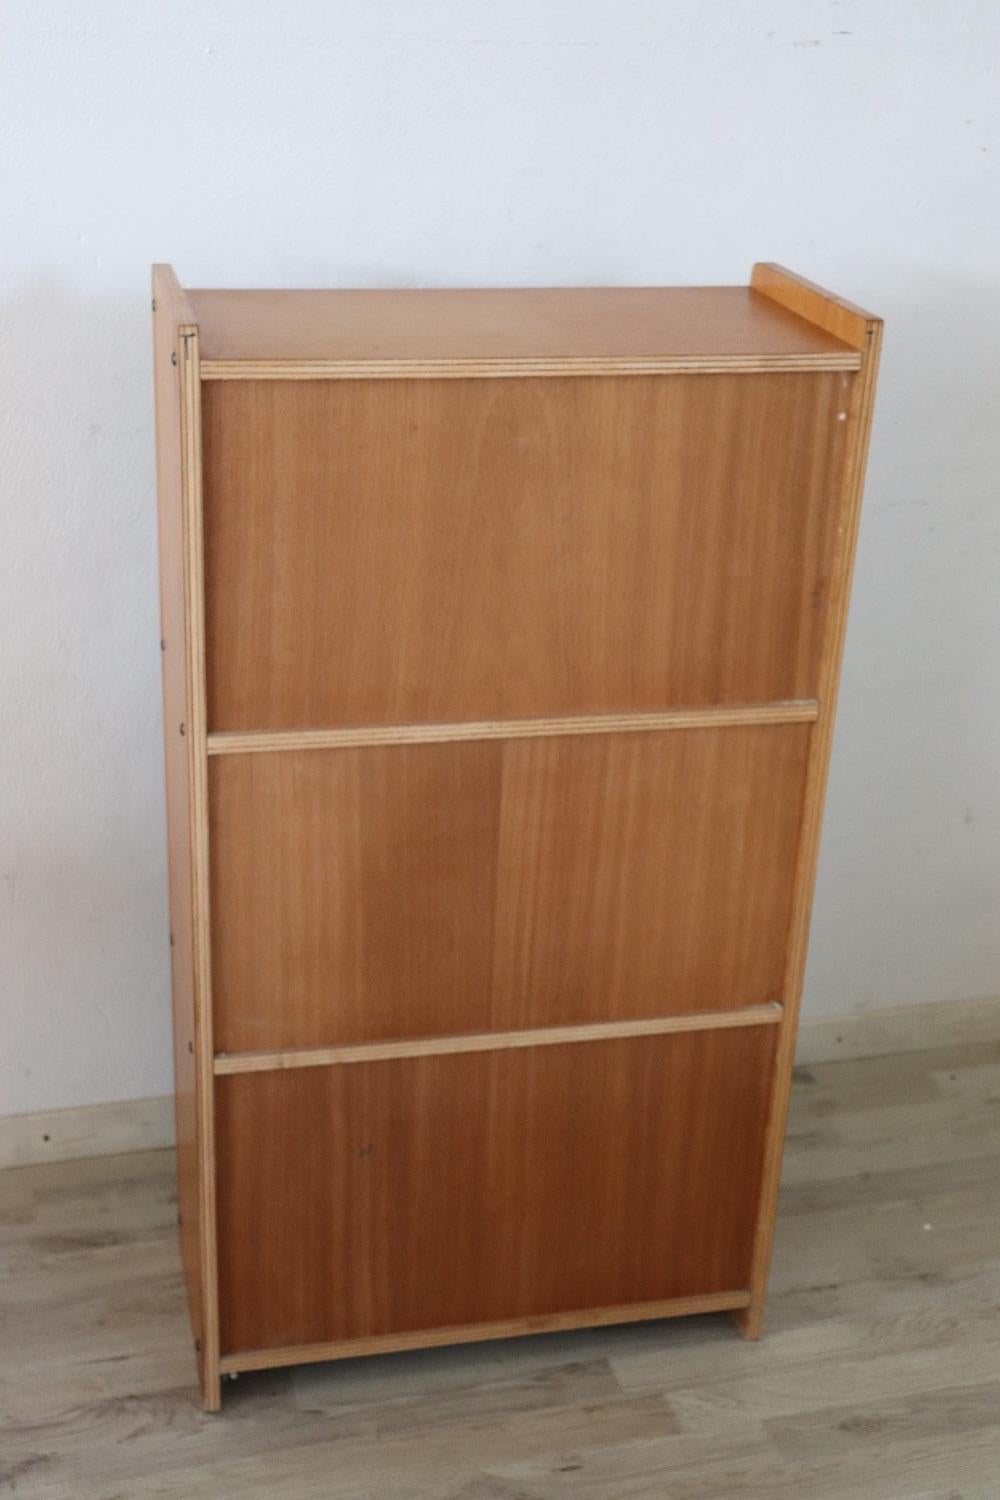 20th Century Italian Vintage Small Bookcase or Vitrine with Sliding Doors For Sale 1